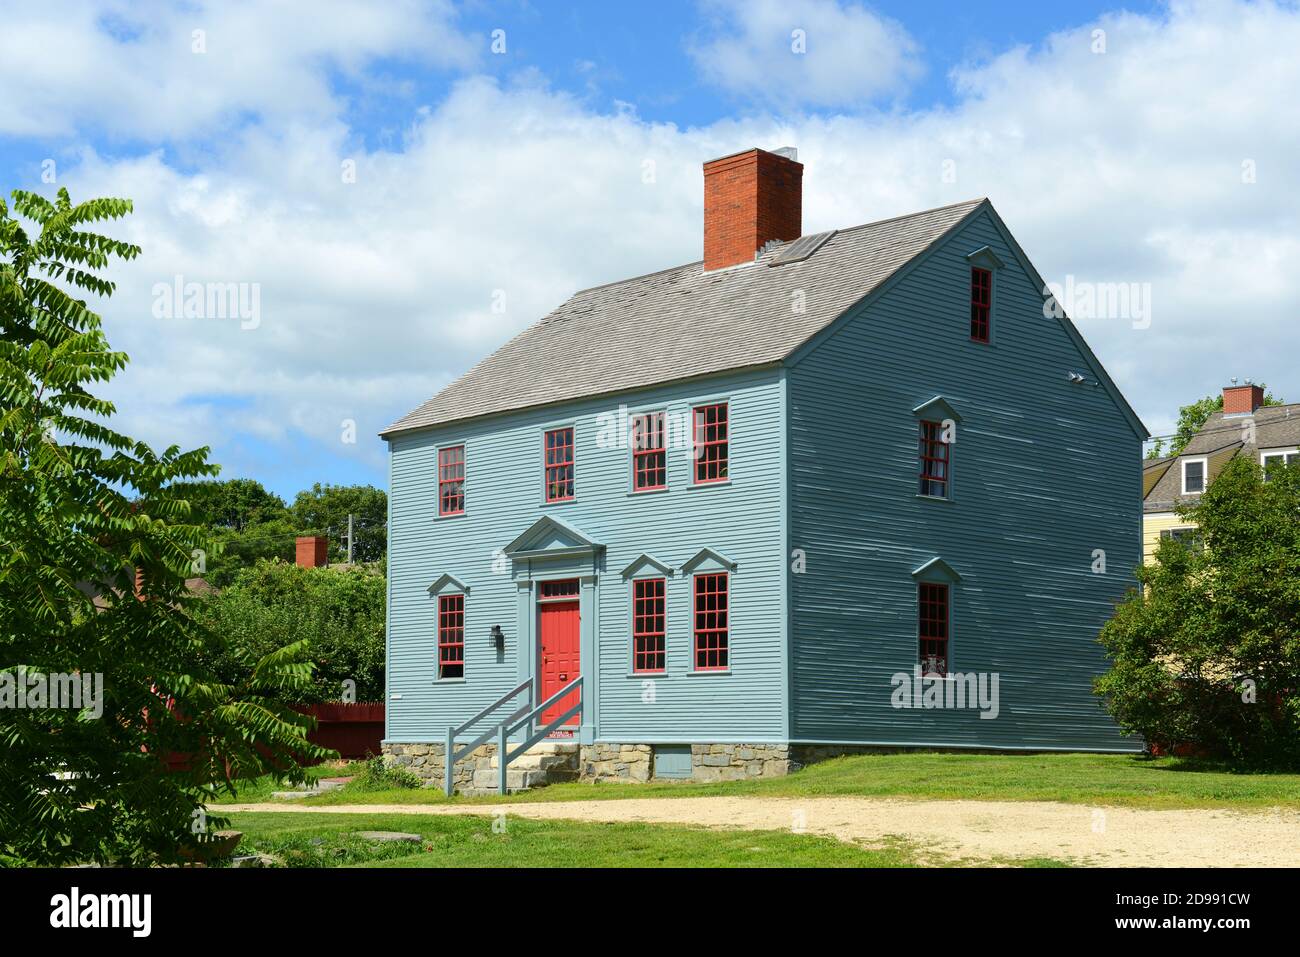 Wheelwright House was built in 1780 at Strawbery Banke Museum in Portsmouth, New Hampshire, USA. Stock Photo